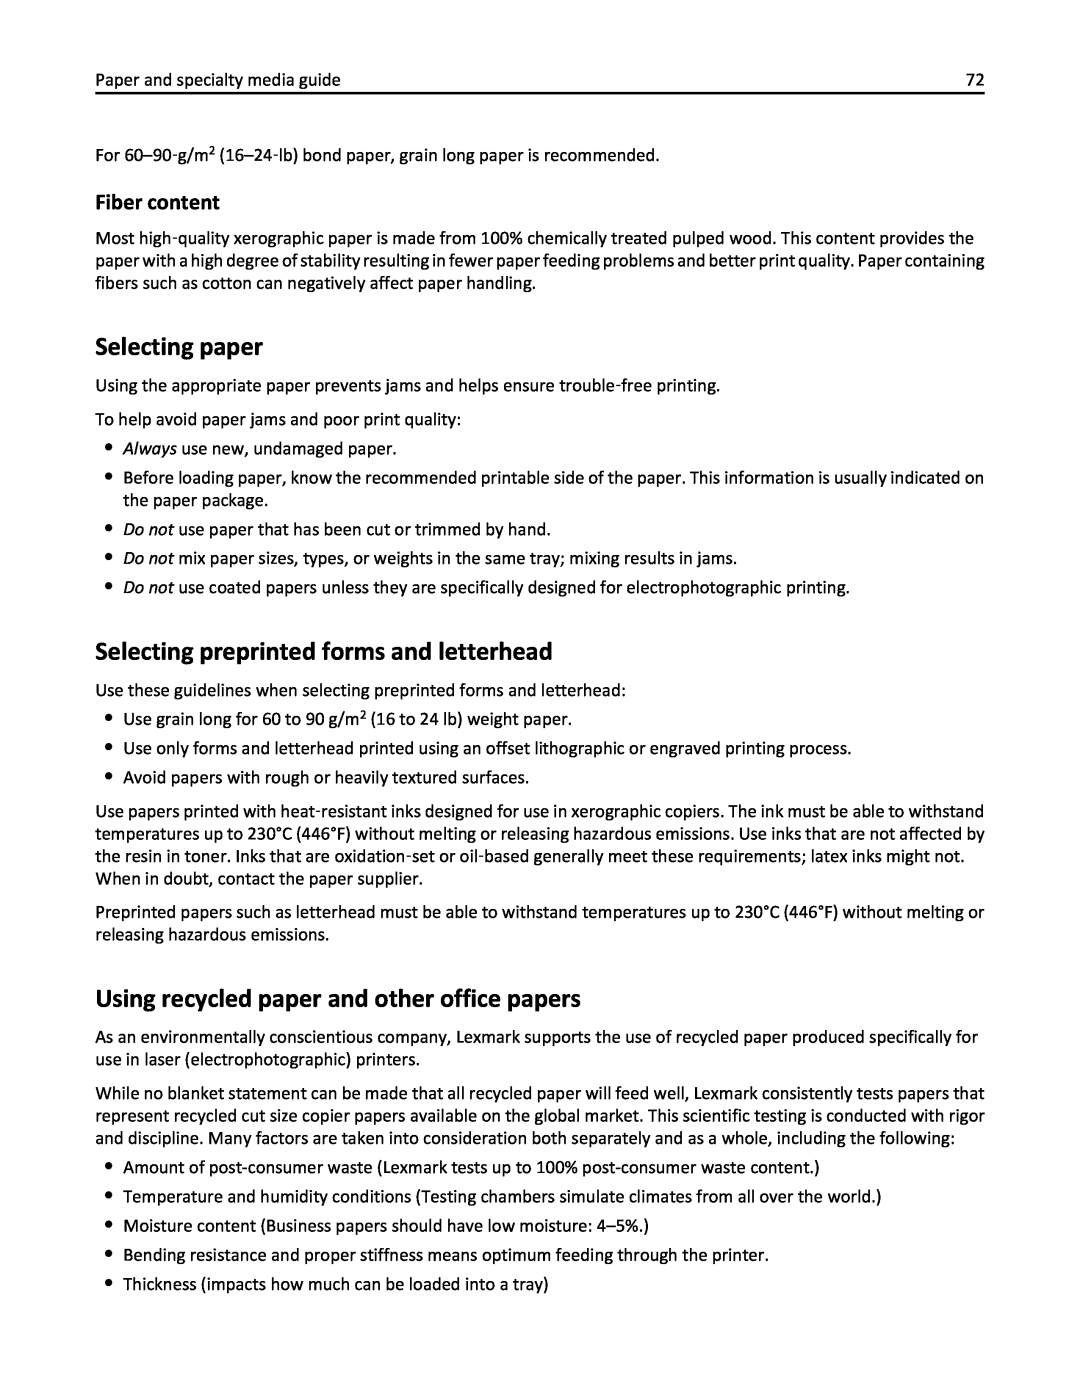 Lexmark 670, 470 Selecting paper, Selecting preprinted forms and letterhead, Using recycled paper and other office papers 